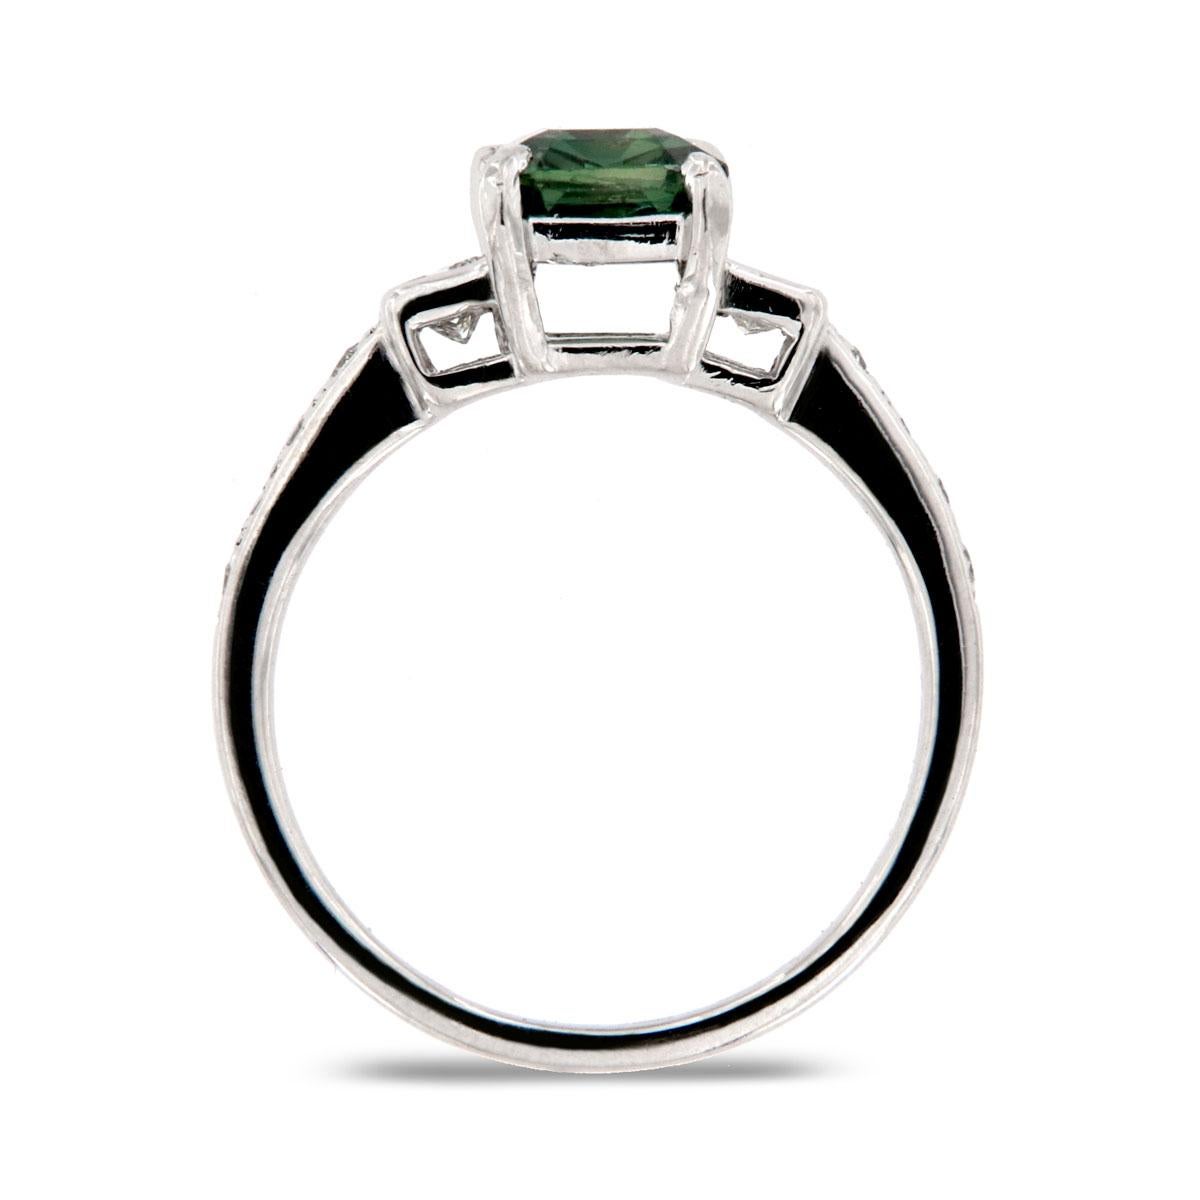 This Delicate platinum ring features a 1.37-carat emerald shape Sri Lankan None Heated Teal color sapphire flanked by two perfectly matched princess shaped natural diamonds and a row of pave set melee diamonds on each side. This stunning ring is